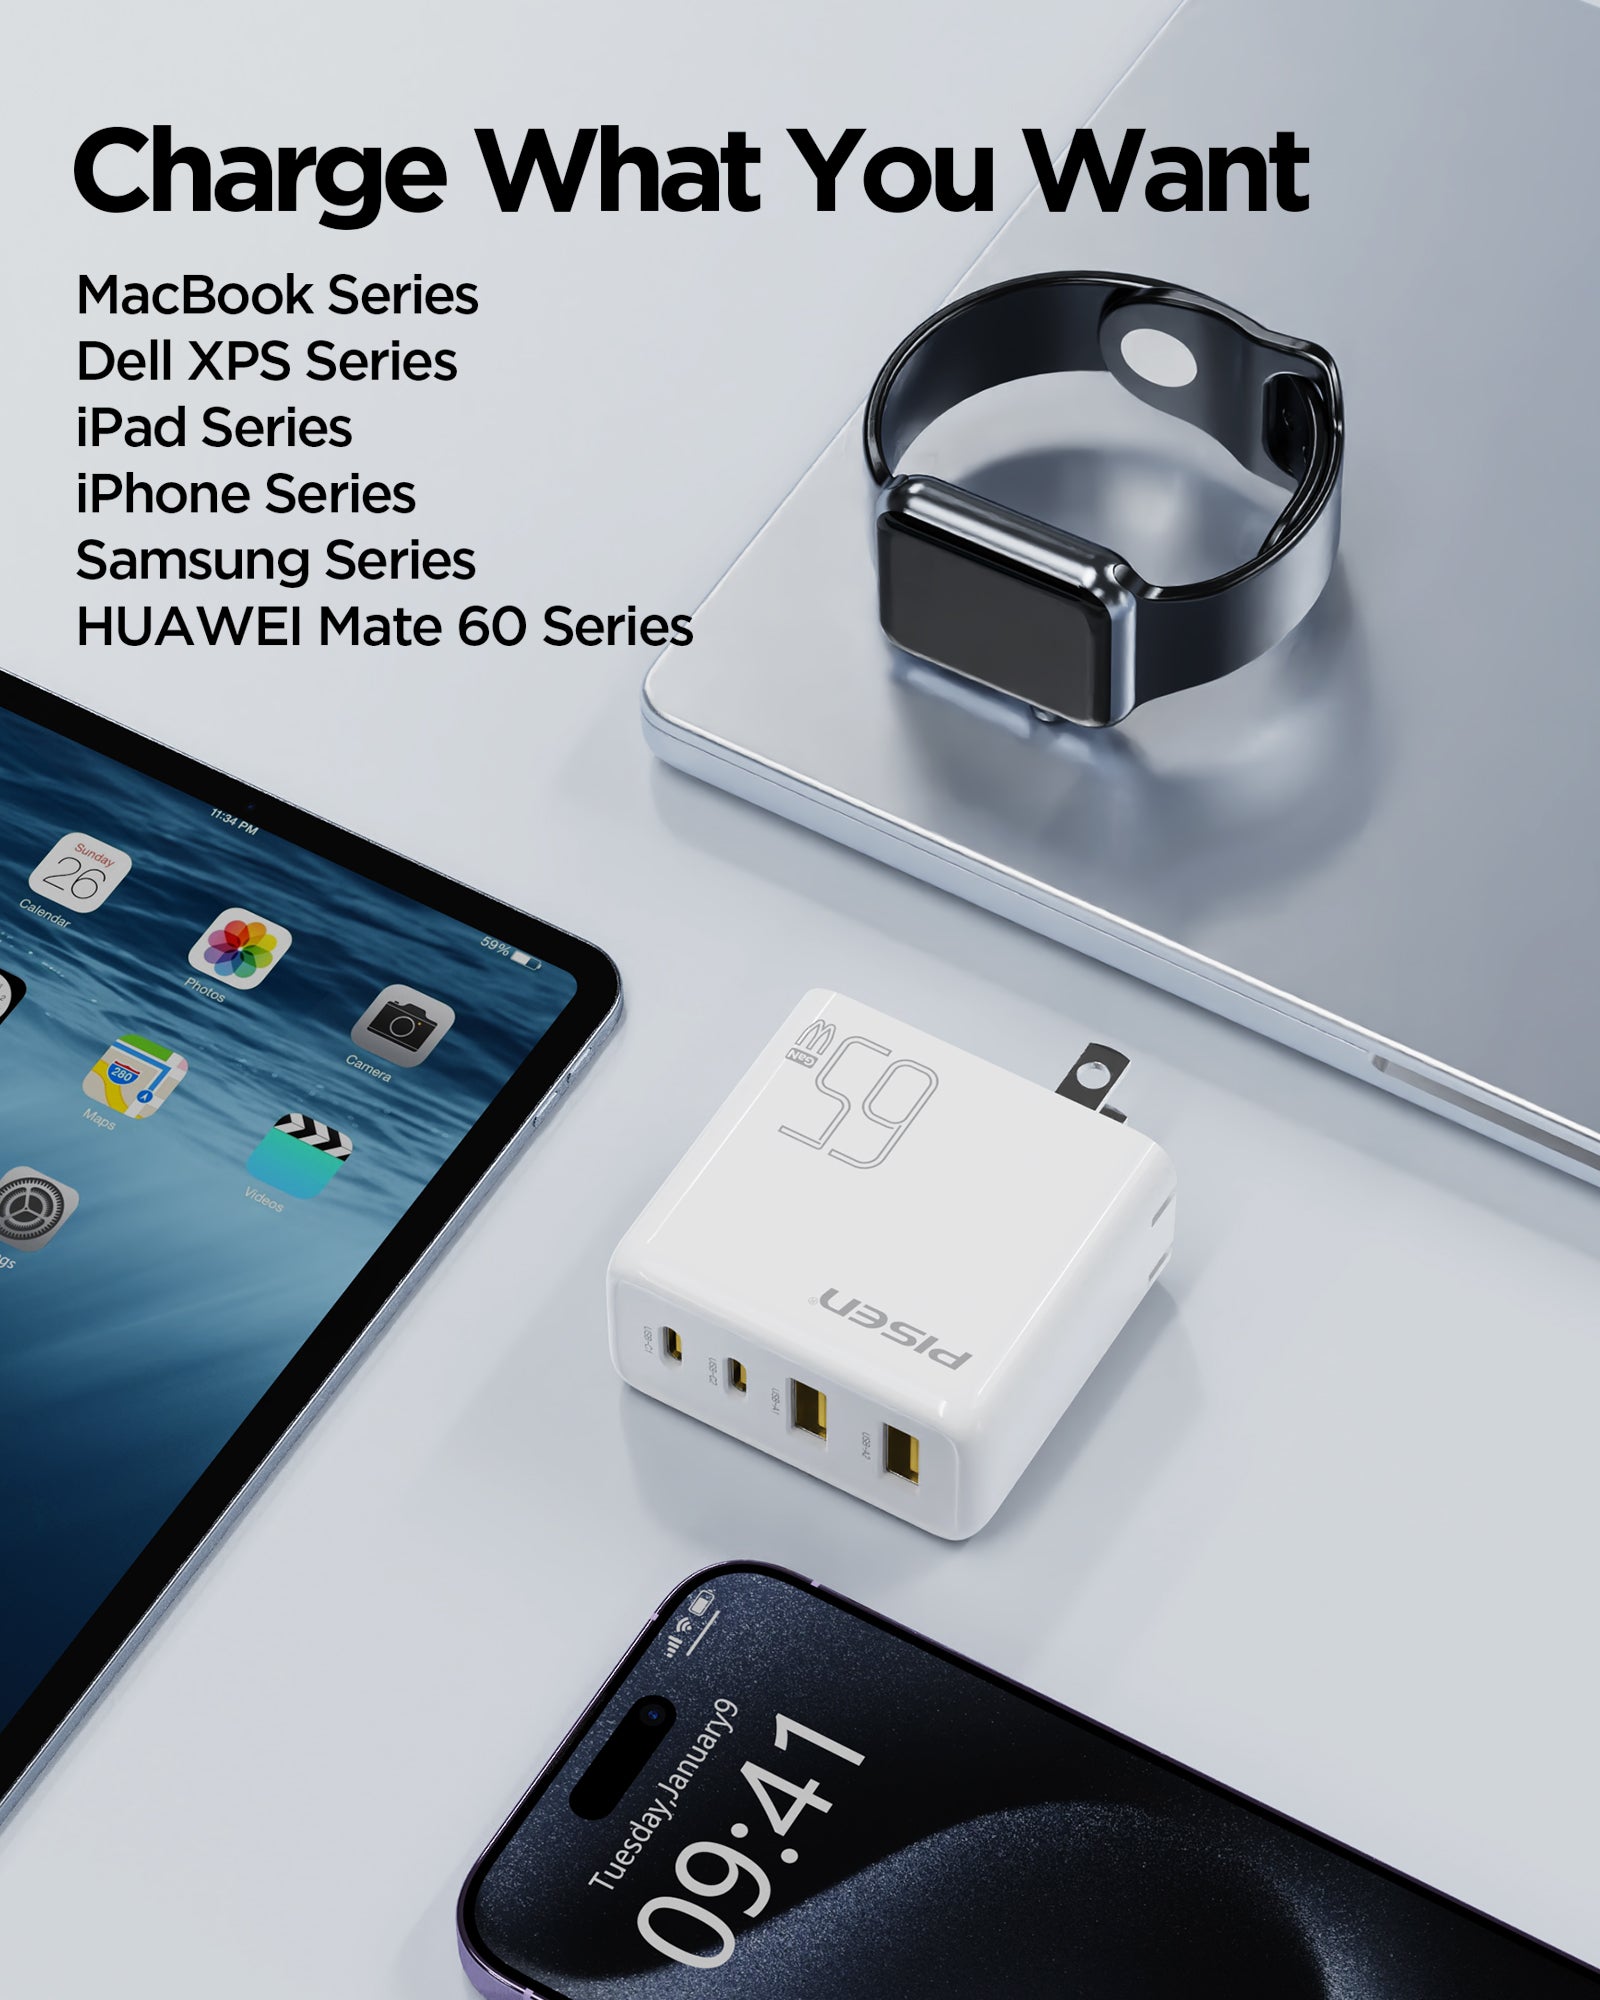 PISEN 65W USB C Charger - USB C Fast Charger Block with 5FT Type C to C Cable, GaN Charger PPS 4-Port Fast Compact Foldable, USB Wall Charger for MacBook Pro/Air, iPad Pro, Galaxy S23, iPhone Series